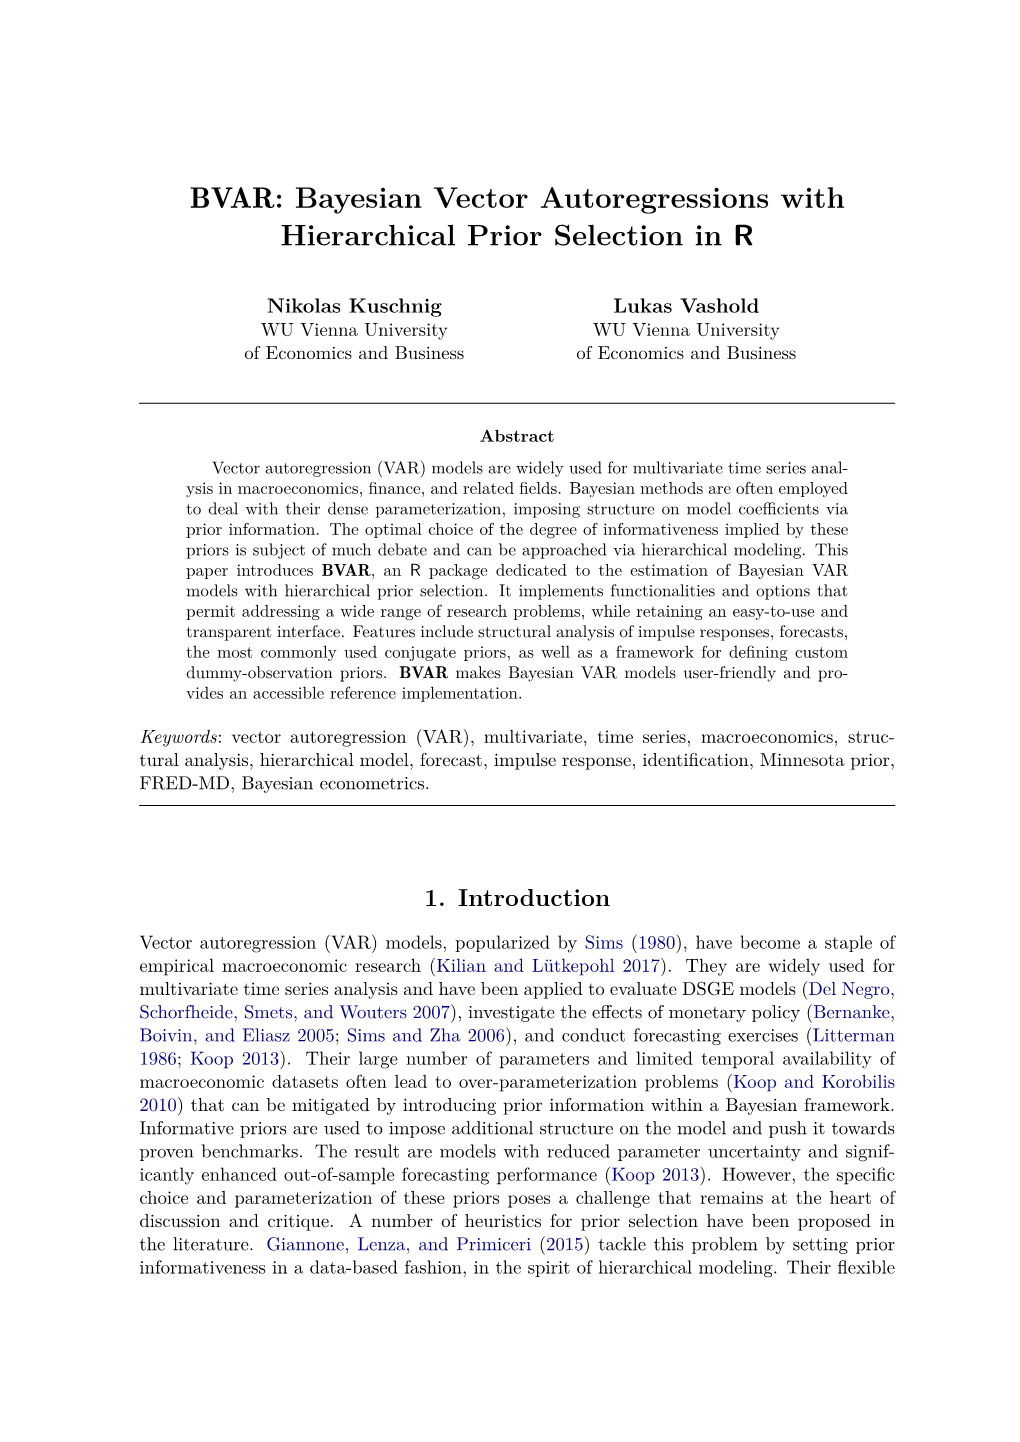 BVAR: Bayesian Vector Autoregressions with Hierarchical Prior Selection in R